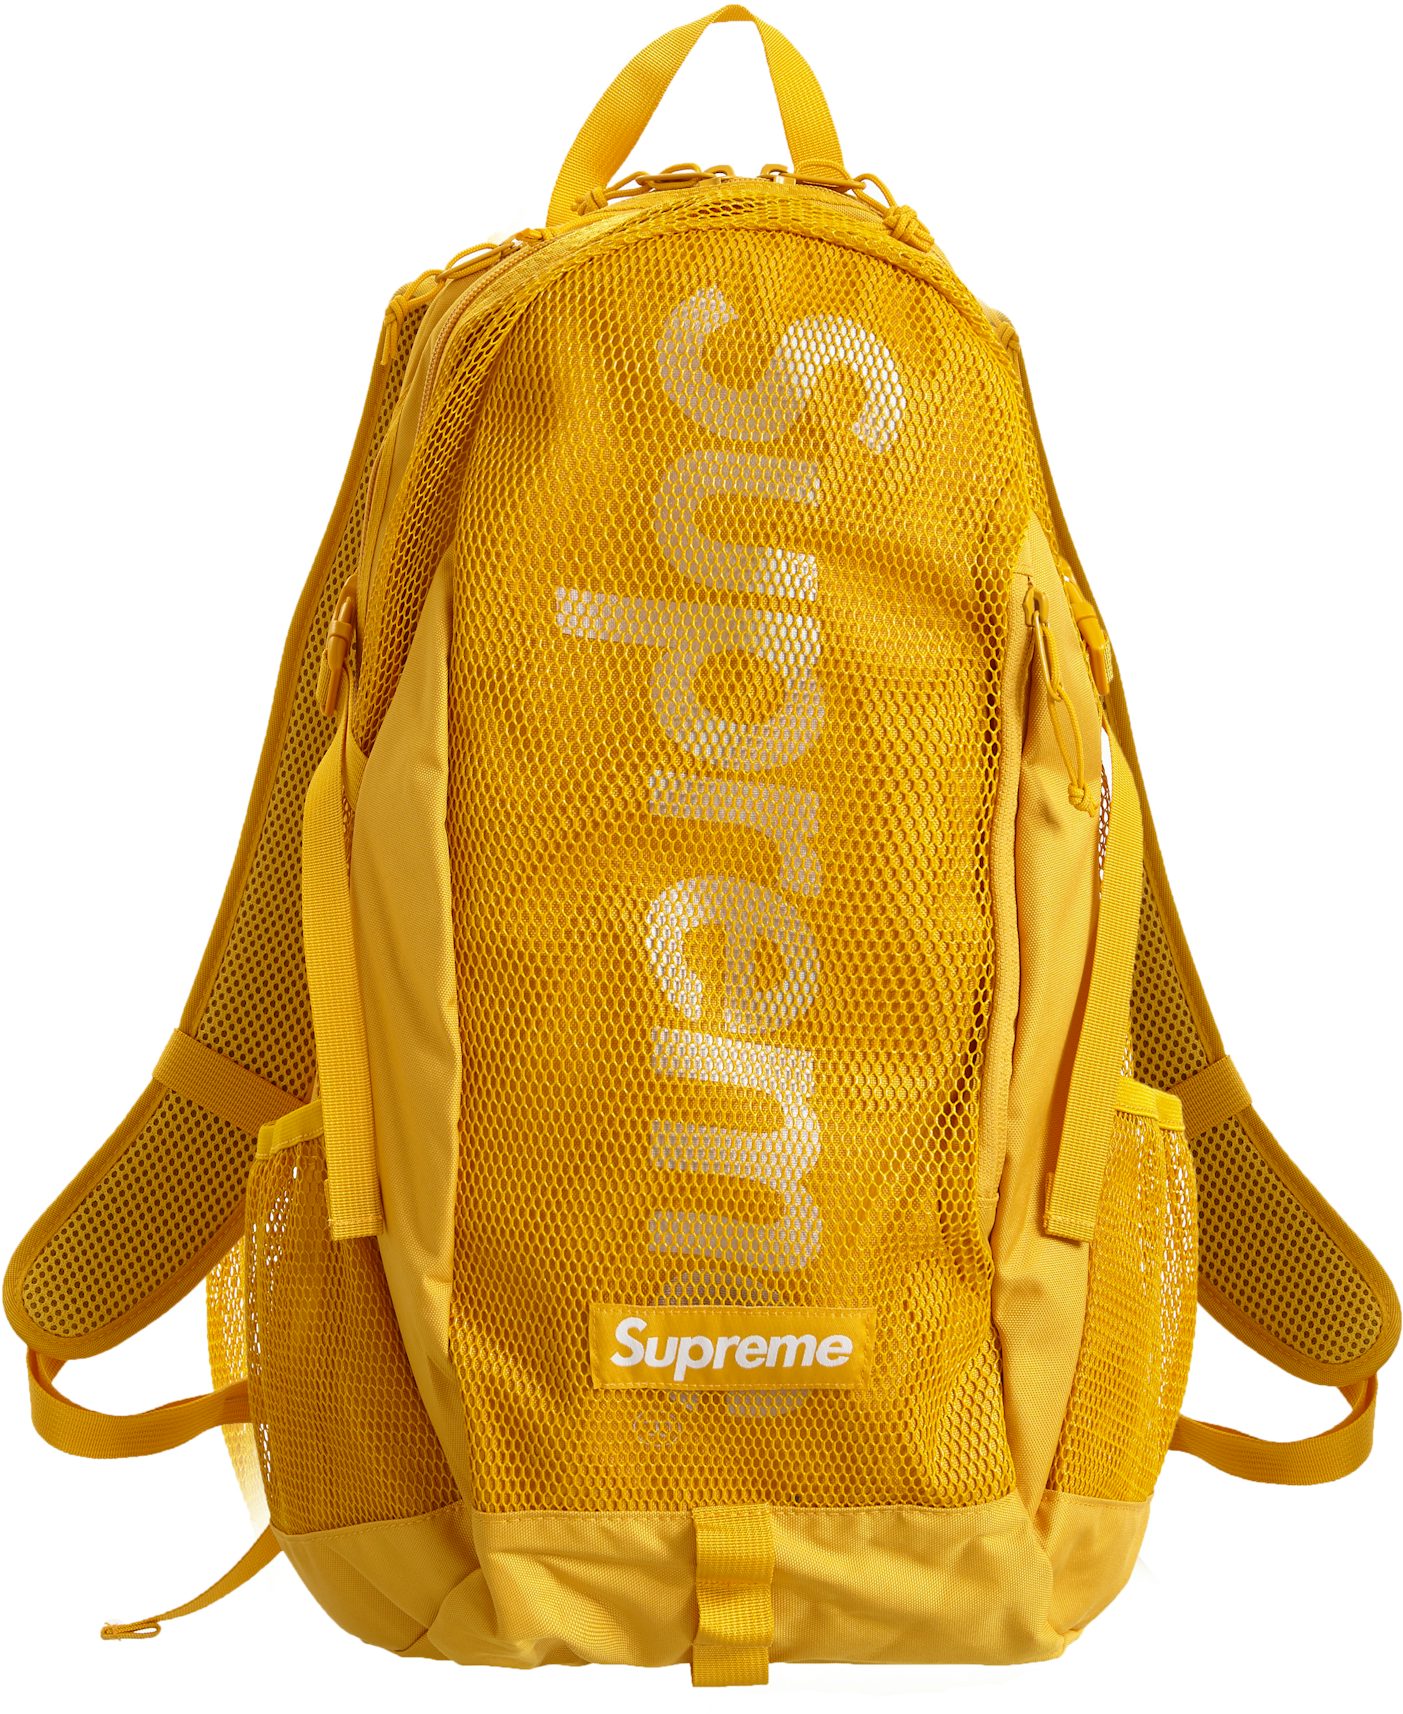 Supreme Backpack 'fw 18' in Purple for Men